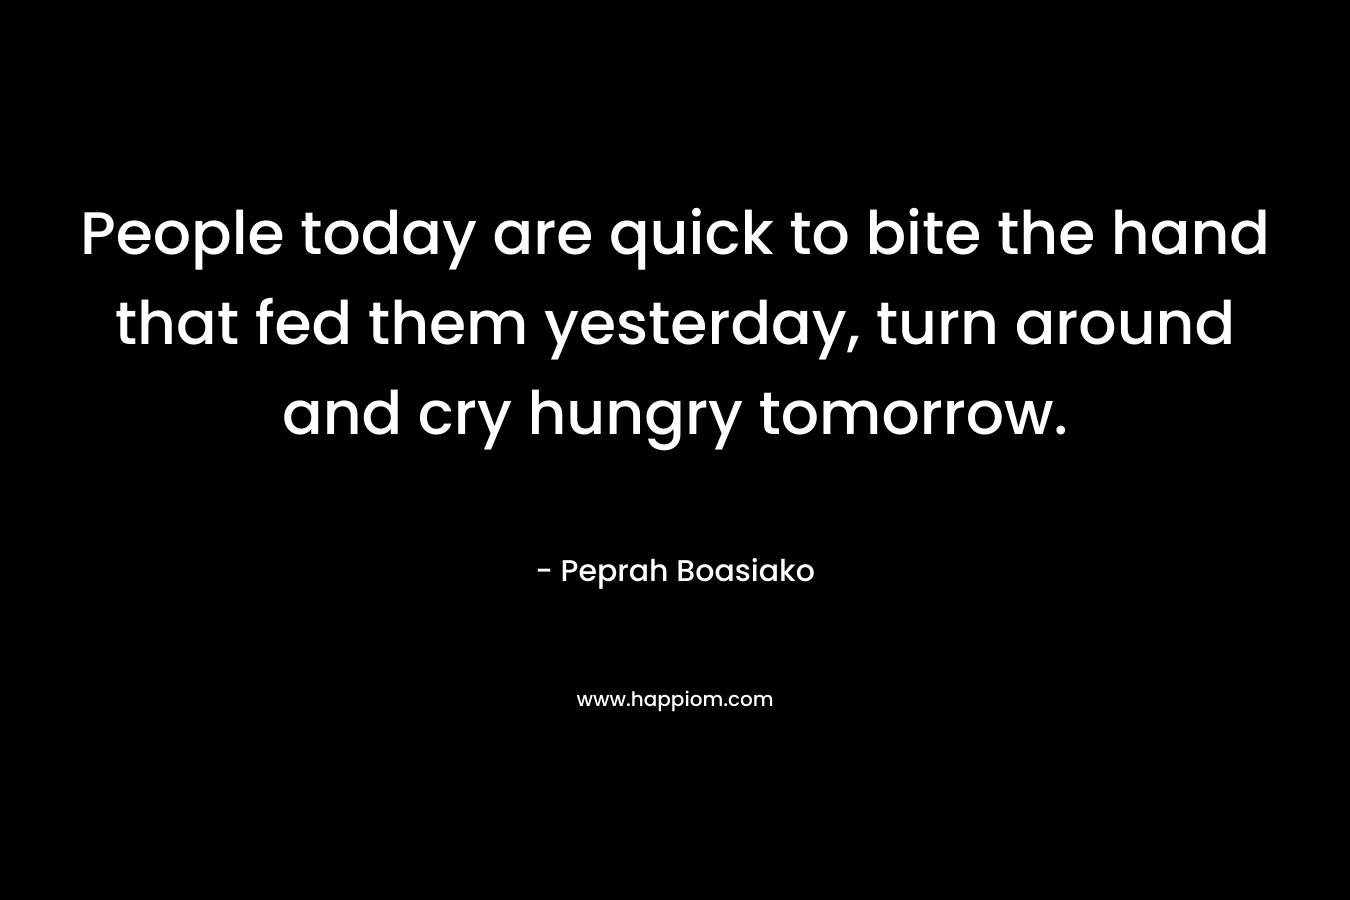 People today are quick to bite the hand that fed them yesterday, turn around and cry hungry tomorrow.